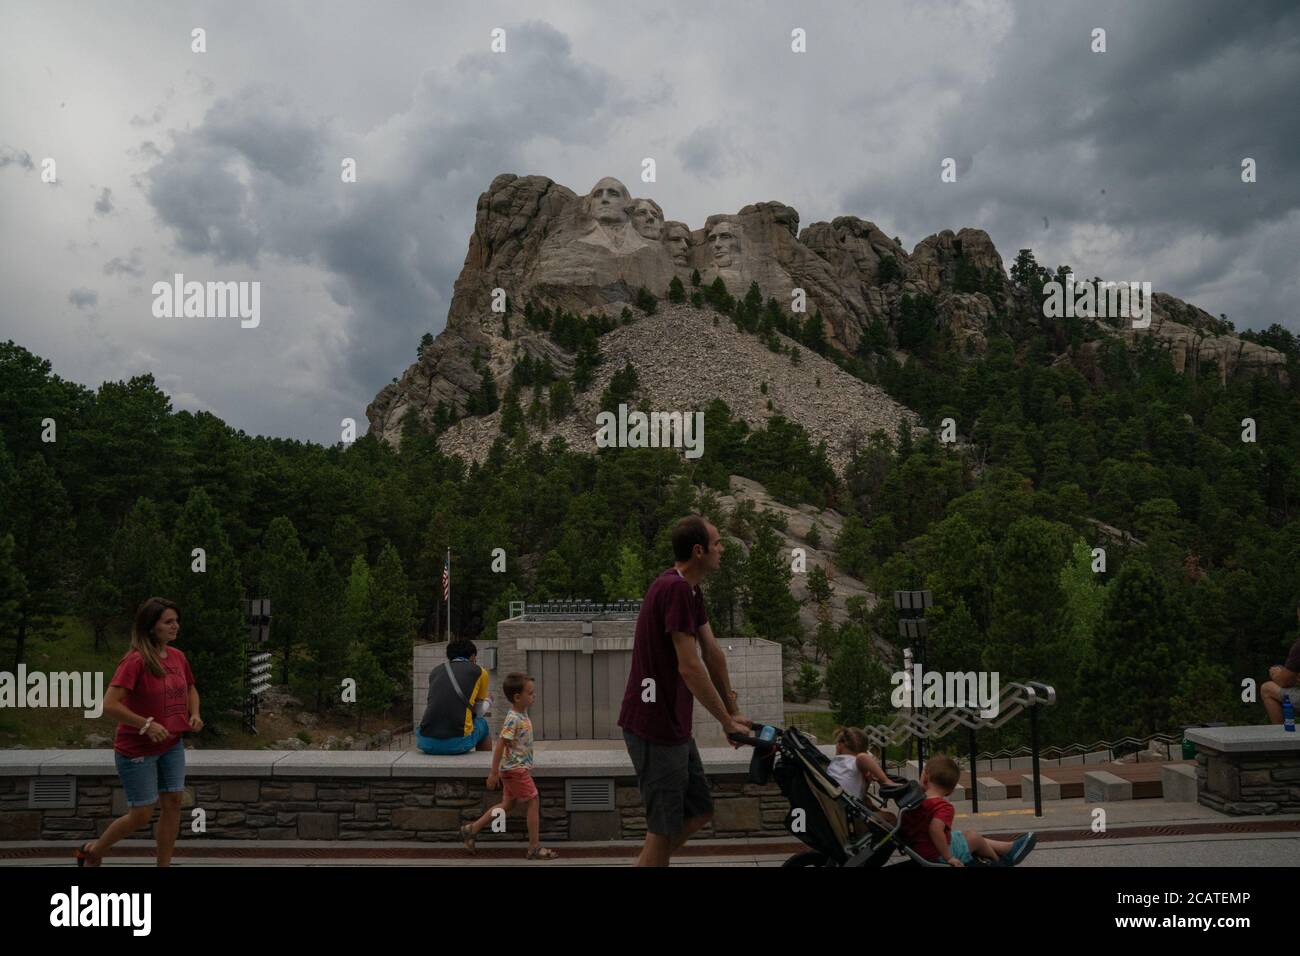 Keystone, South Dakota, USA. 8th Aug, 2020. Mount Rushmore National Memorial during the COVID-19 pandemic on August 8, 2020. Mount Rushmore National Memorial is a massive sculpture carved into Mount Rushmore in the Black Hills region of South Dakota. Completed in 1941 under the direction of Gutzon Borglum and his son Lincoln, the sculpture's roughly 60-ft.-high granite faces depict U.S. presidents George Washington, Thomas Jefferson, Theodore Roosevelt and Abraham Lincoln. The site also features a museum with interactive exhibits. Credit: Bryan Smith/ZUMA Wire/Alamy Live News Stock Photo